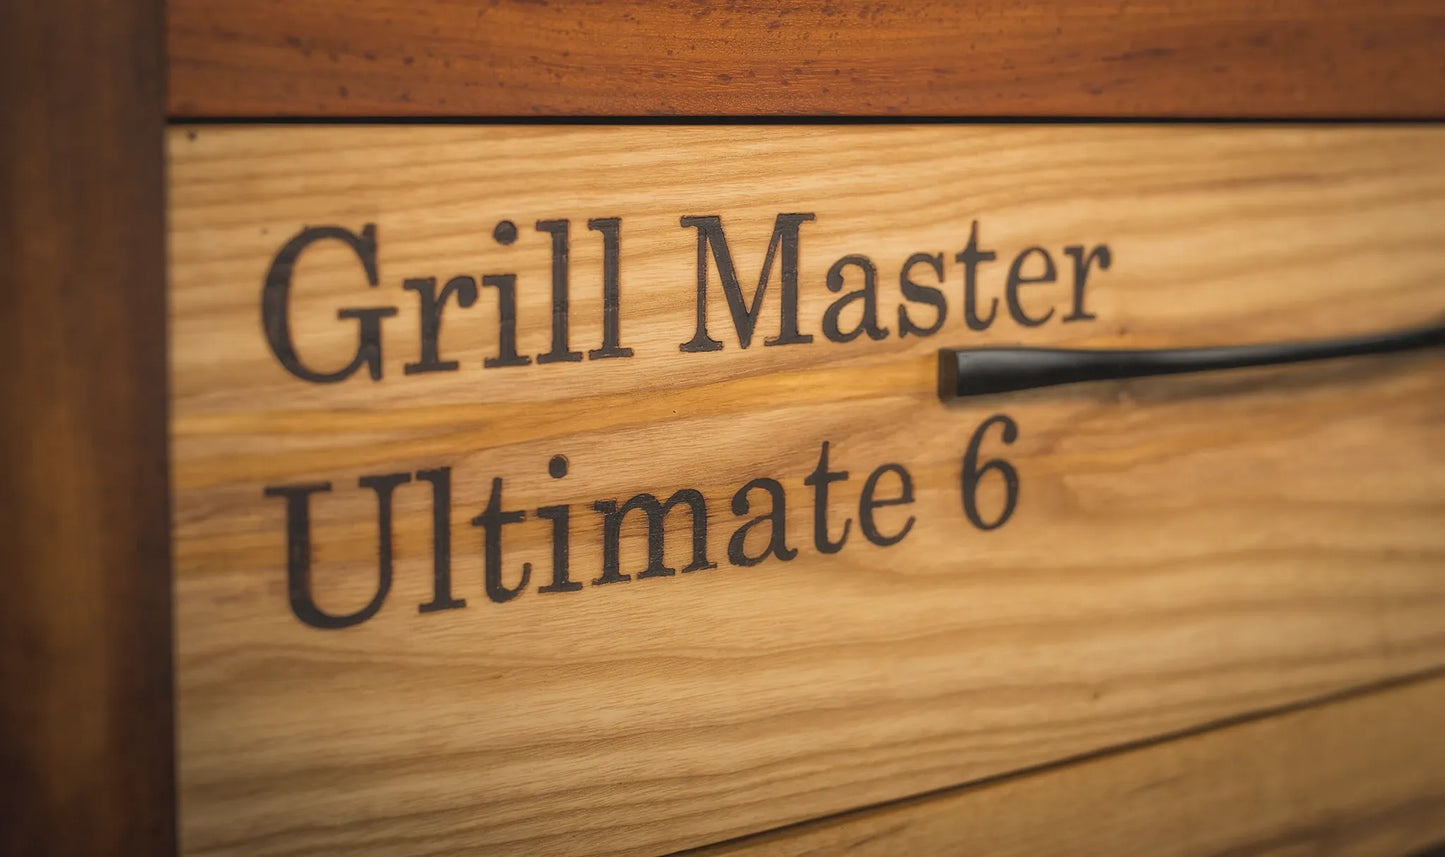 Ultimate Grill Master 6 - Braaiers.co.za